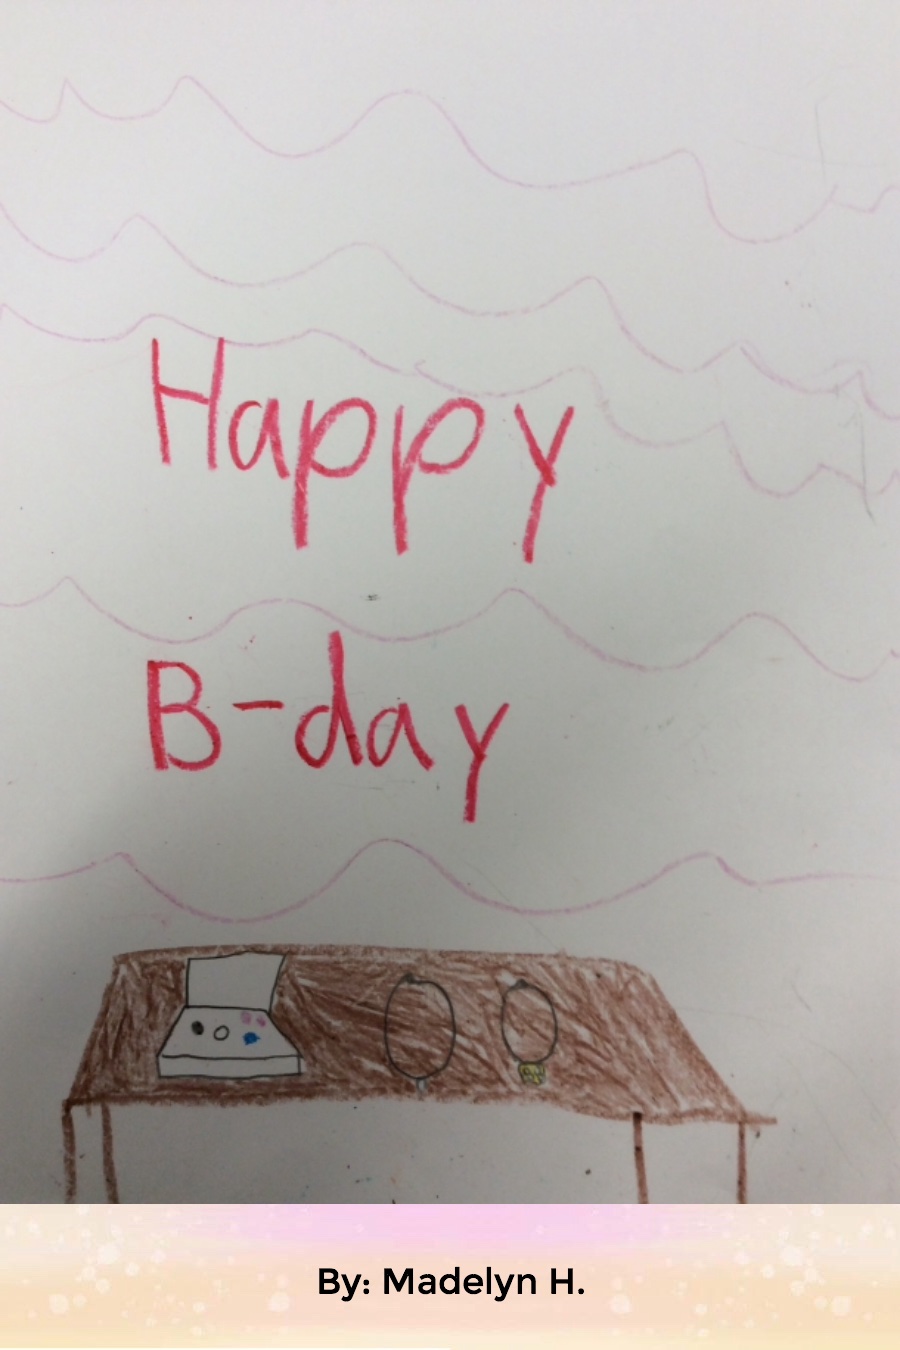 Happy B-Day by Madelyn H